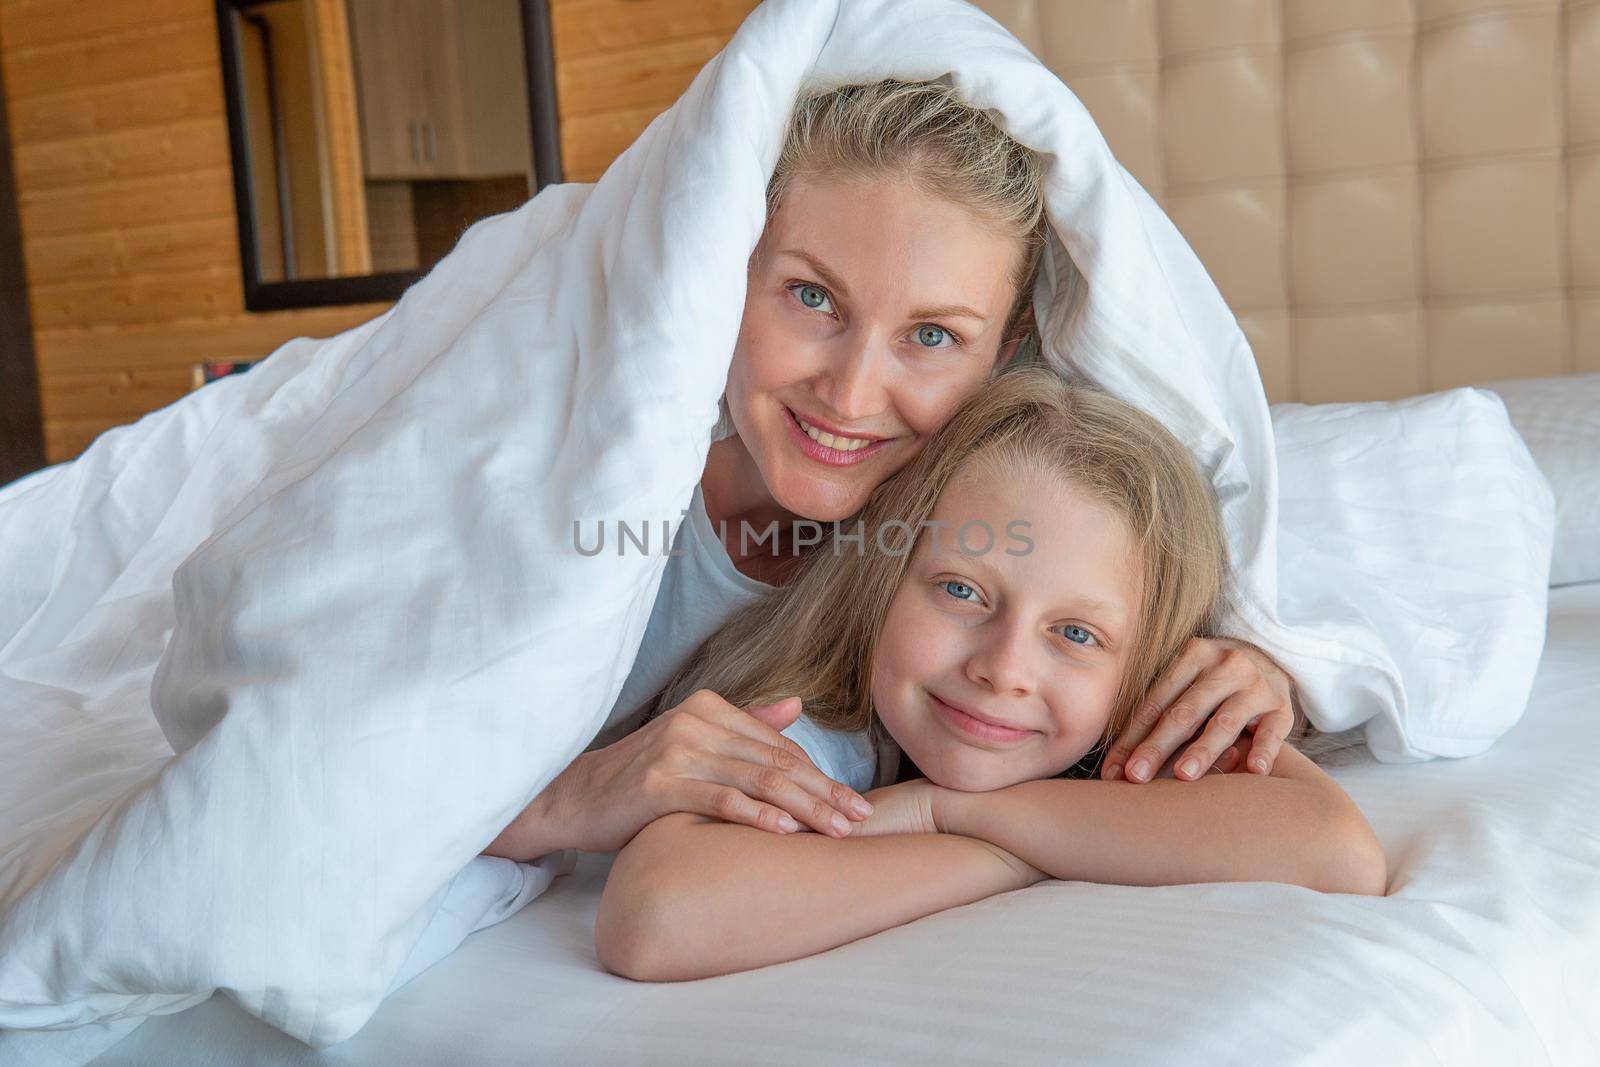 Blanket daughter over family glad woman bed head young beautiful, from lying white for cell for people home, nap comfortable. Room relaxation one, day by 89167702191